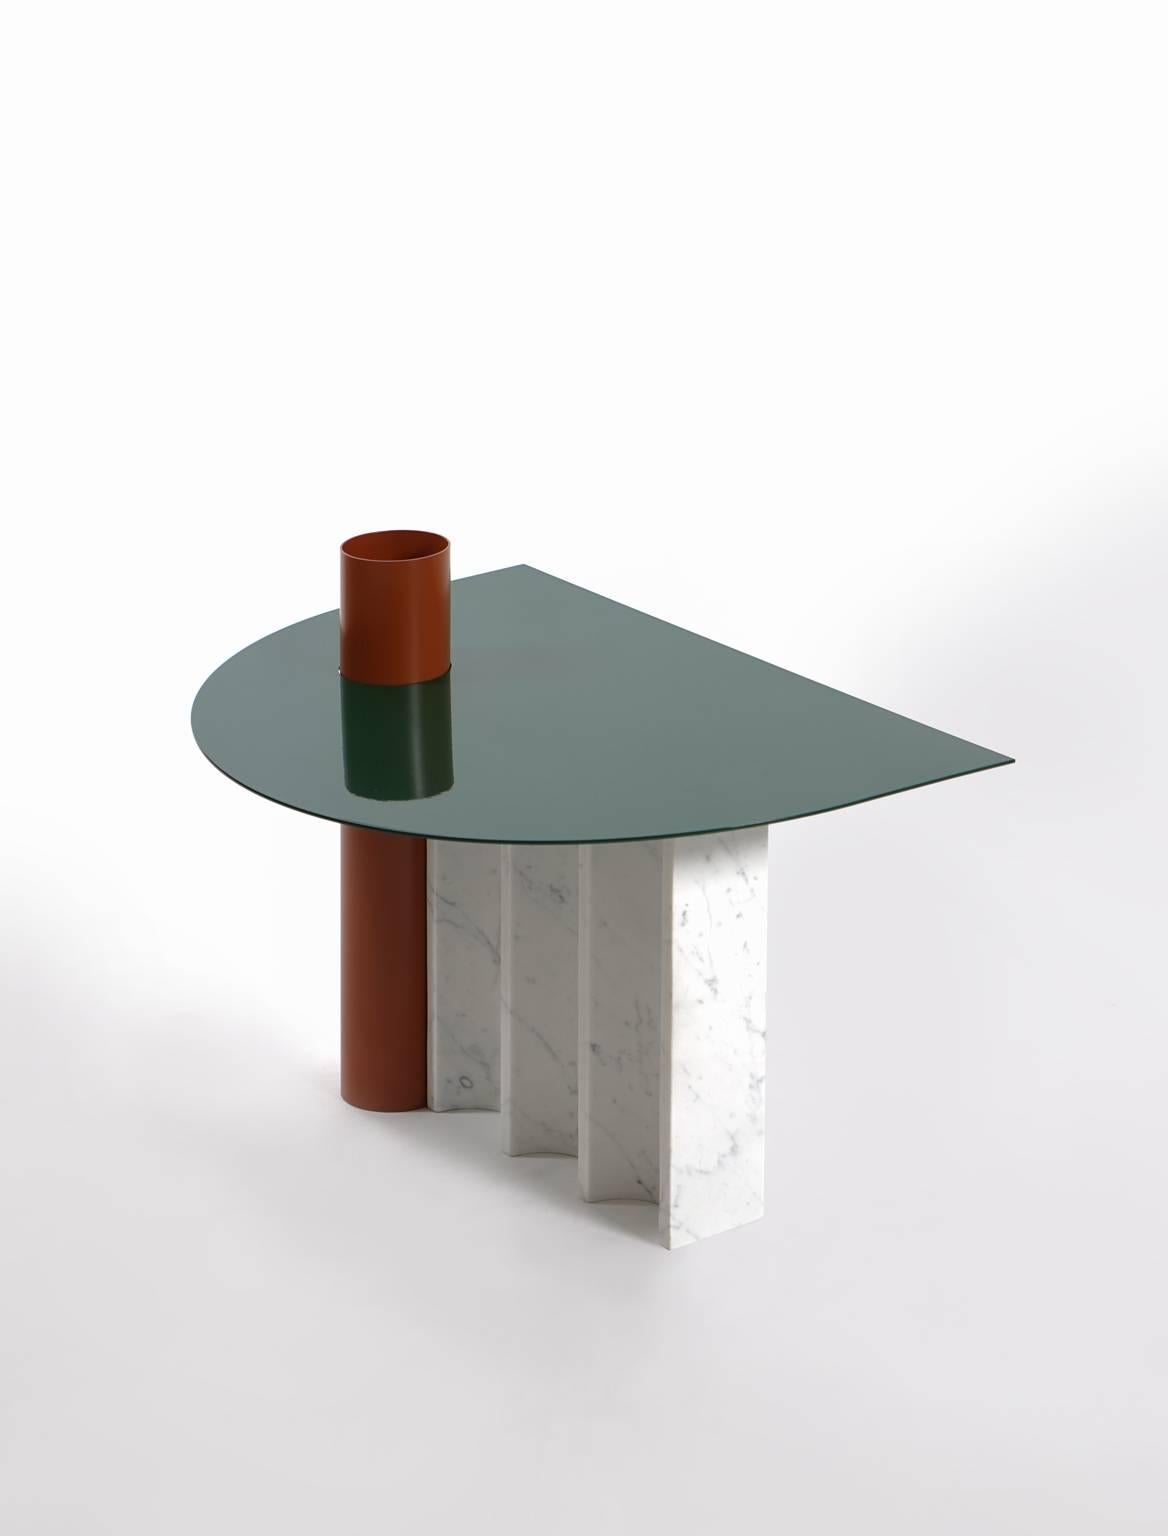 The Disused coffee table is an object of the self-titled collection. 
The Disused collection is based on the Maxim Scherbakov's digital artwork, which makes advances to classical antique shapes. Composed of simple forms, it refers the viewer to the